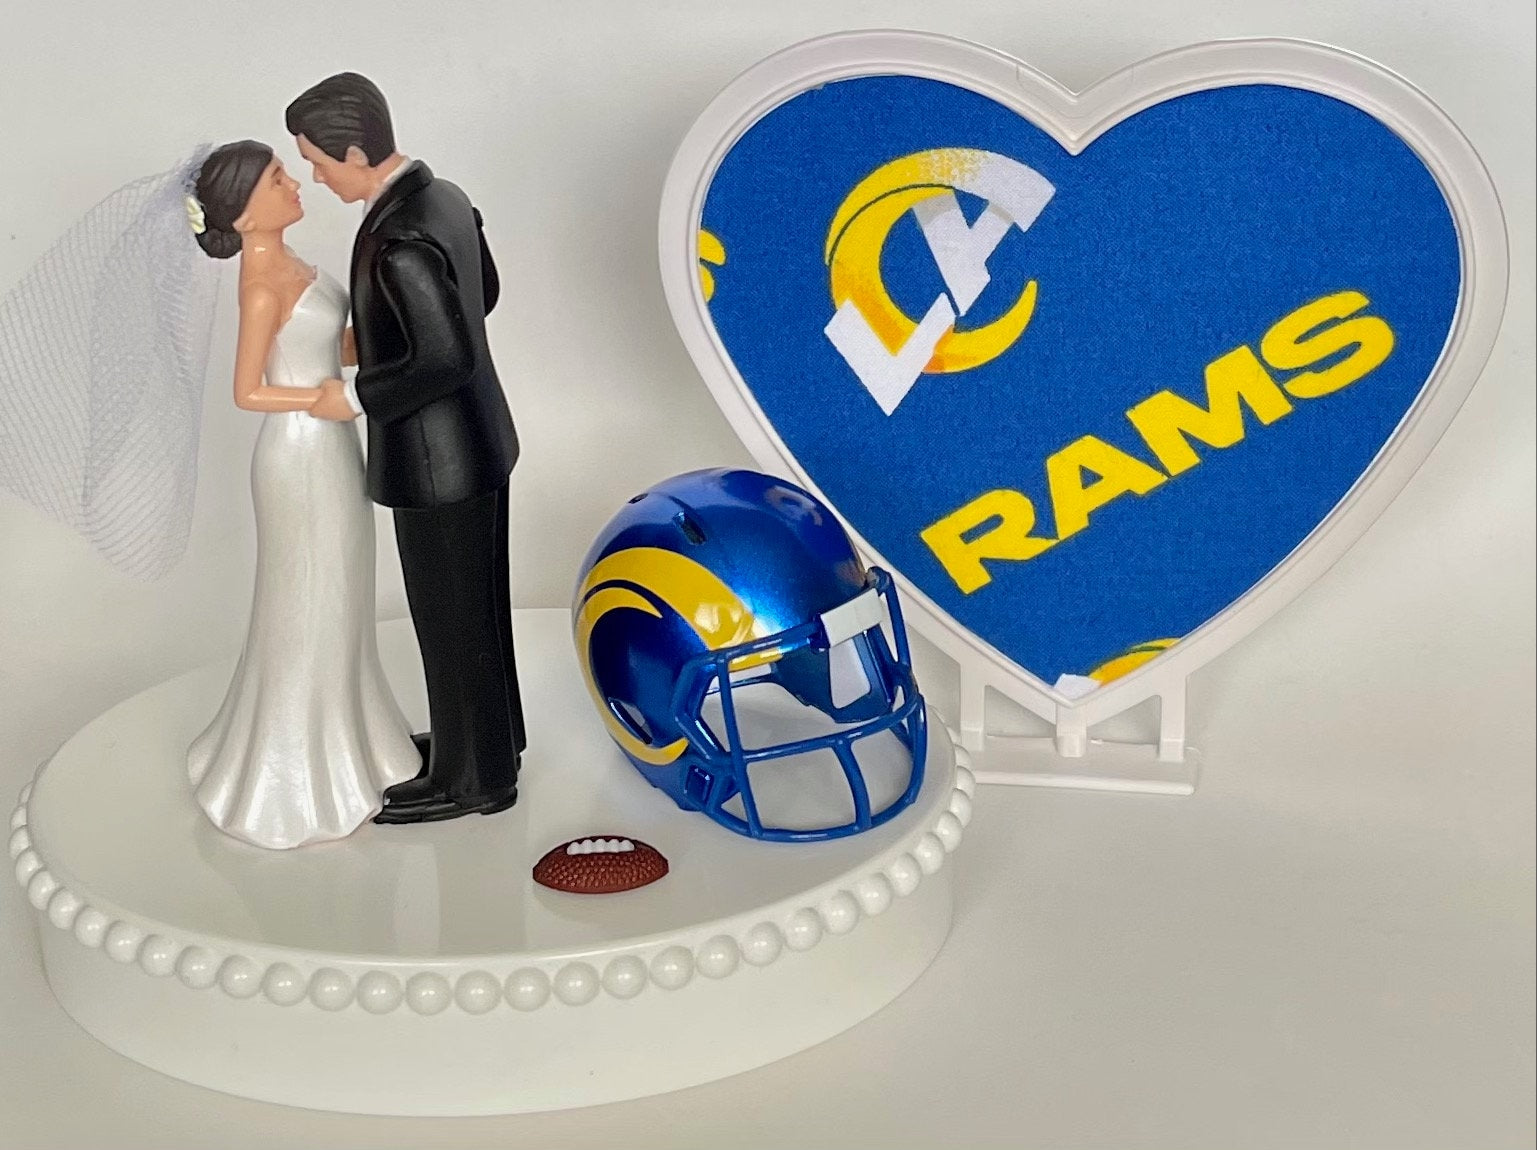 Wedding Cake Topper Los Angeles Rams Football Themed Beautiful Short-Haired Bride and Groom One-of-a-Kind Sports Fan Cake Top Shower Gift